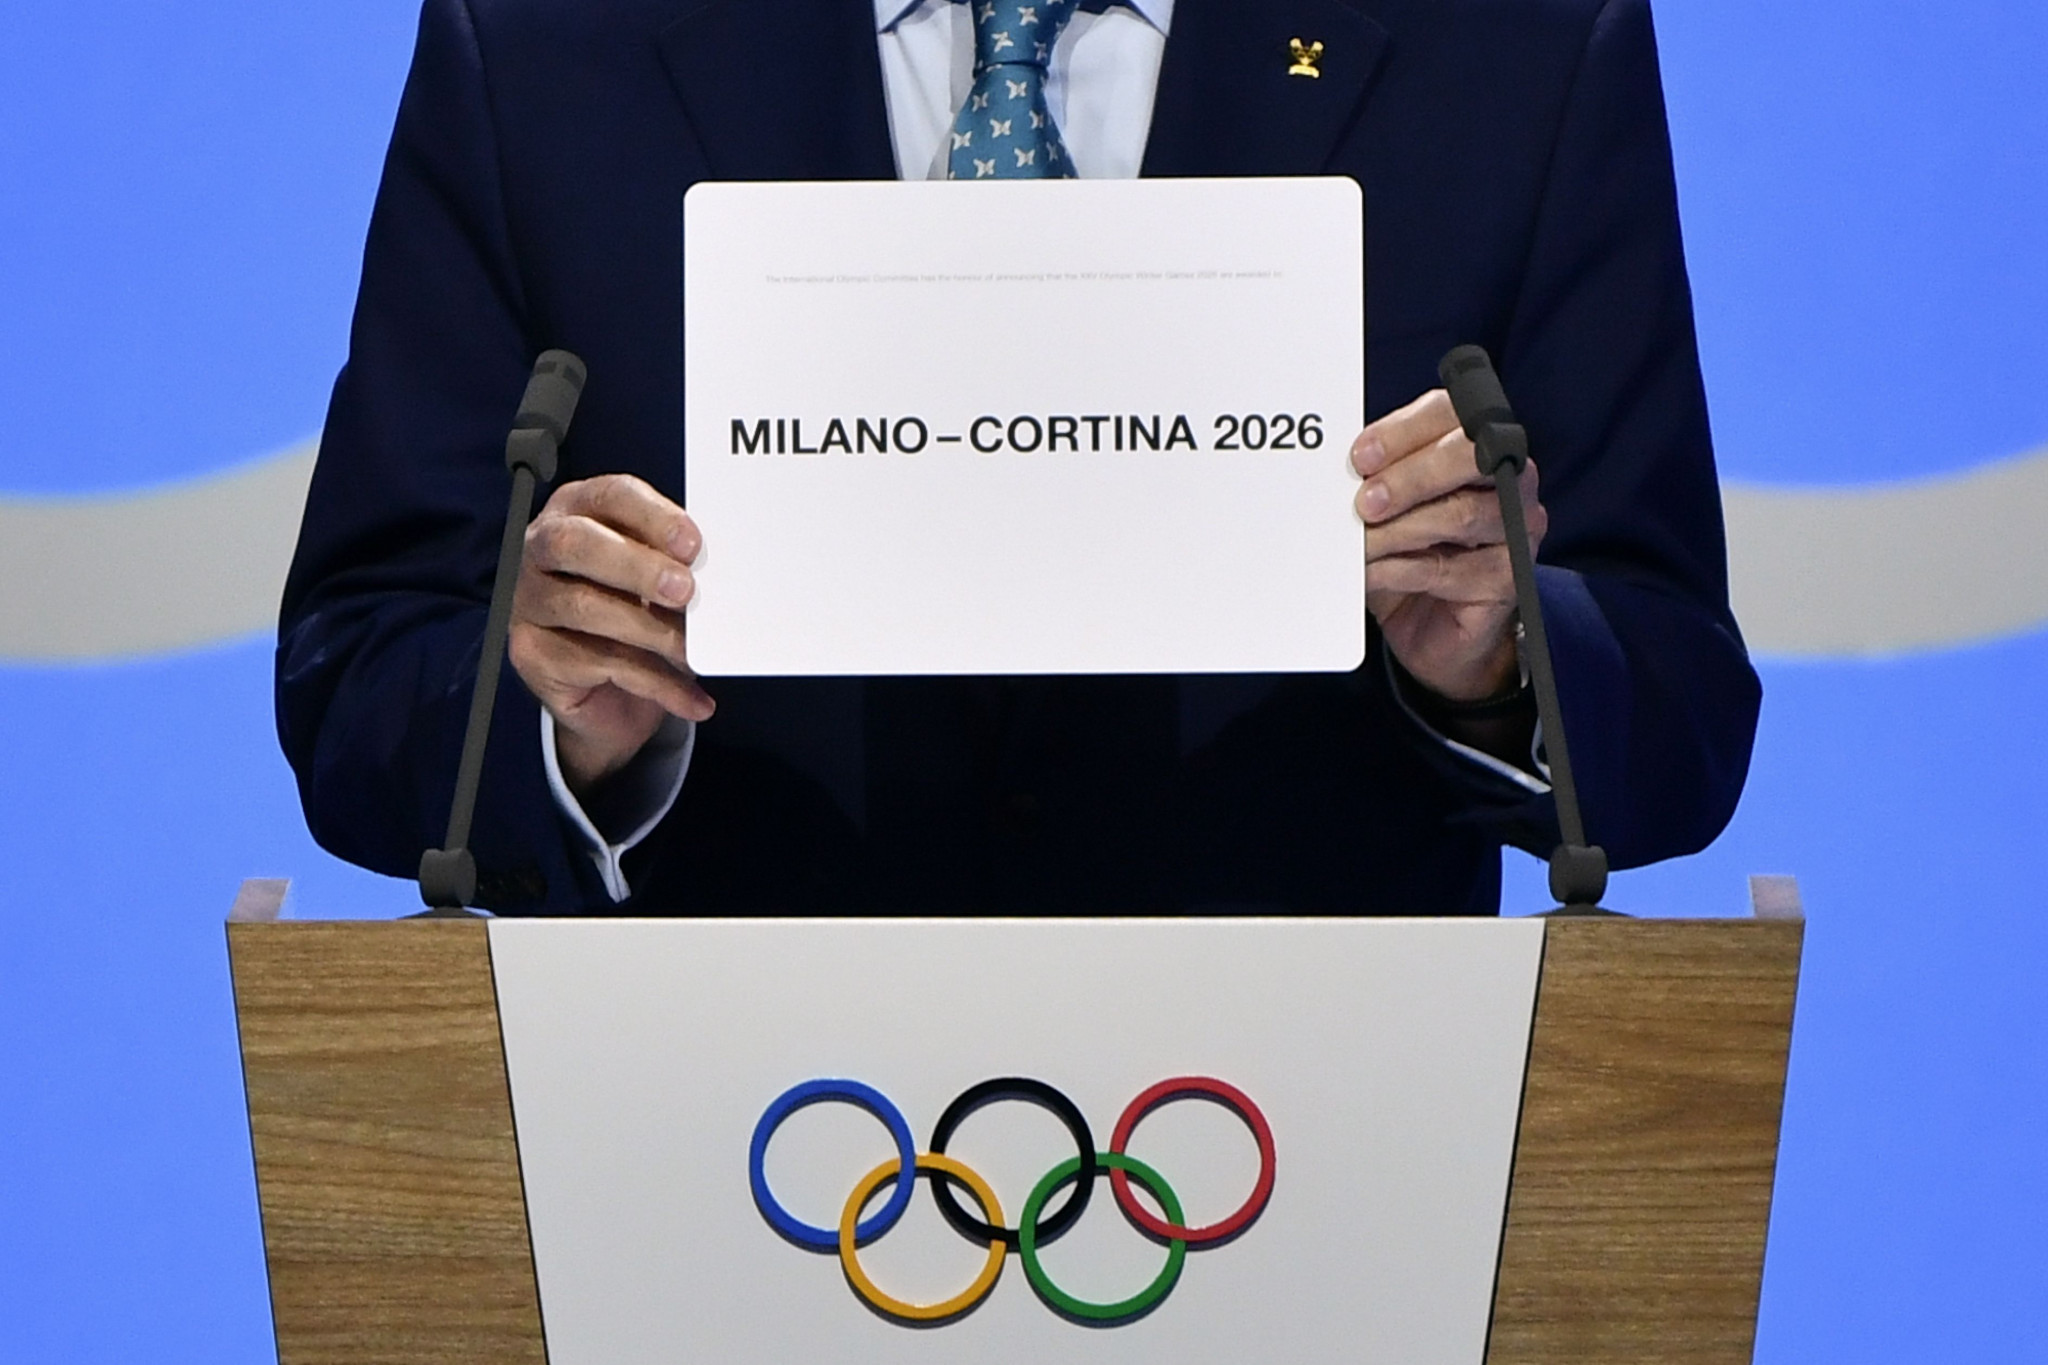 Cortina will host the 2026 Winter Olympics with Milan ©Getty Images